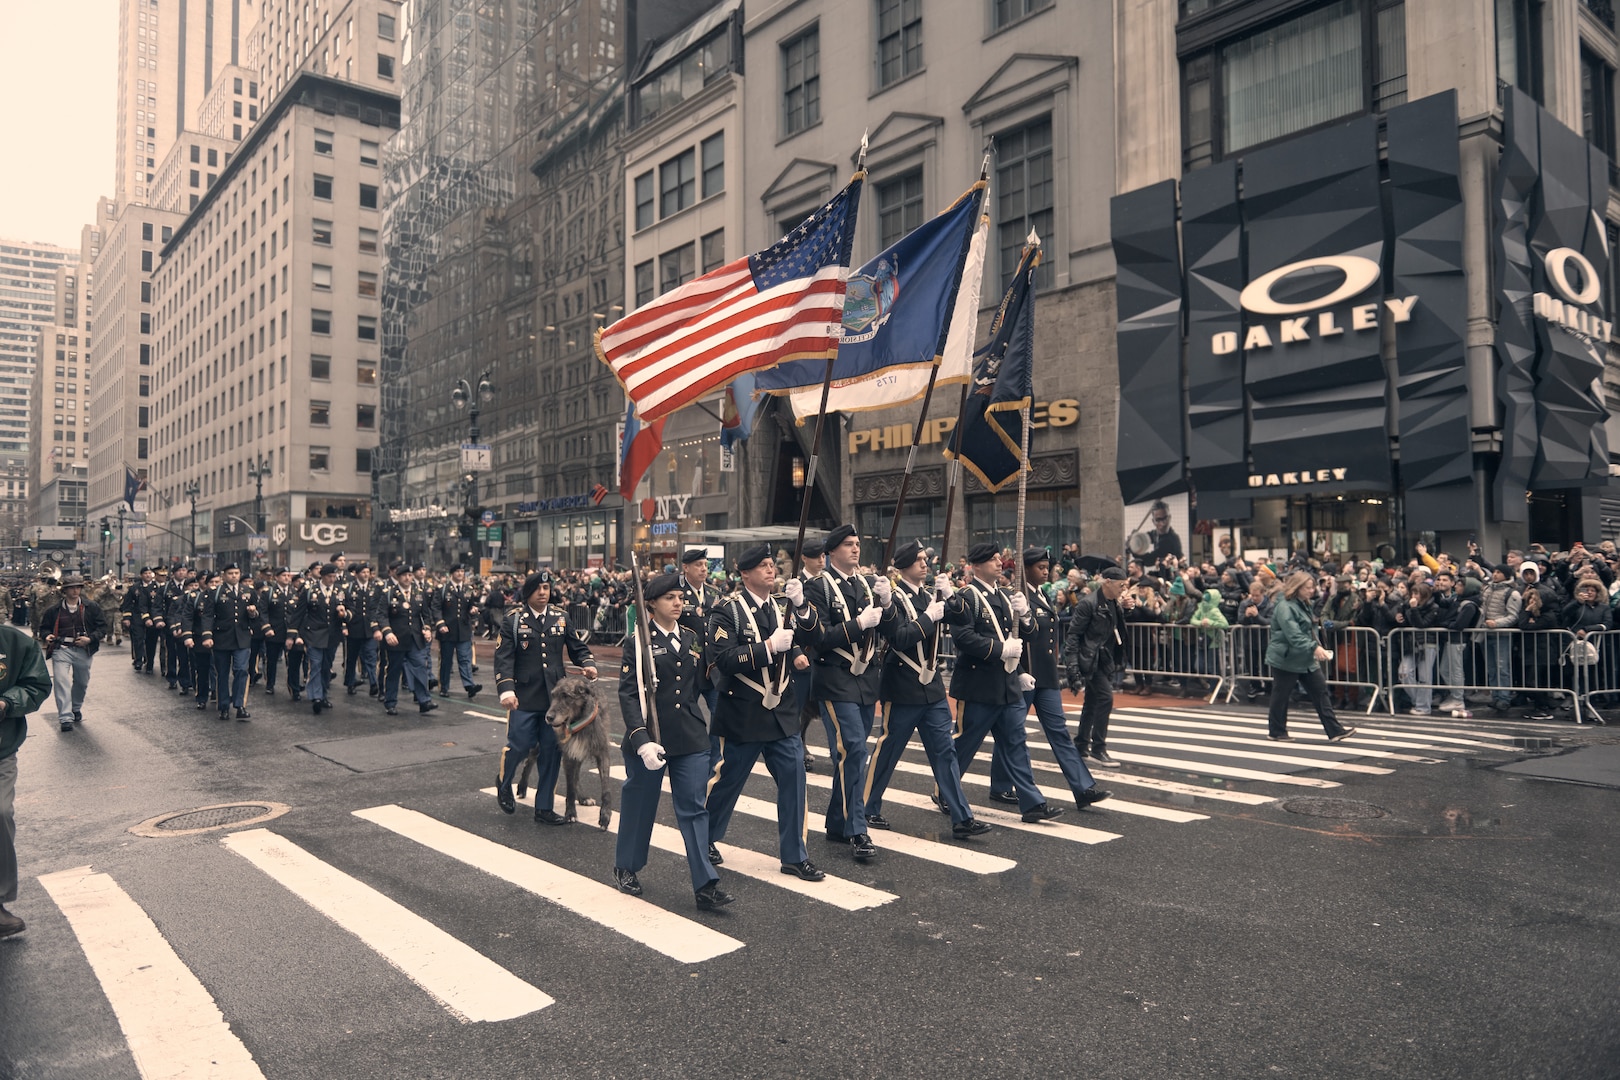 Soldiers of the New York Army National Guard's 1st Battalion, 69th Infantry Regiment, lead the St. Patrick's Day parade, Manhattan, New York, March 17, 2022. The 69th Infantry started the day, full of tradition, at 6 a.m. with a whiskey toast and then to the parade where city officials estimated more than 2 million showed up to watch which has been held every year since 1762, with the 69th leading it since 1851.